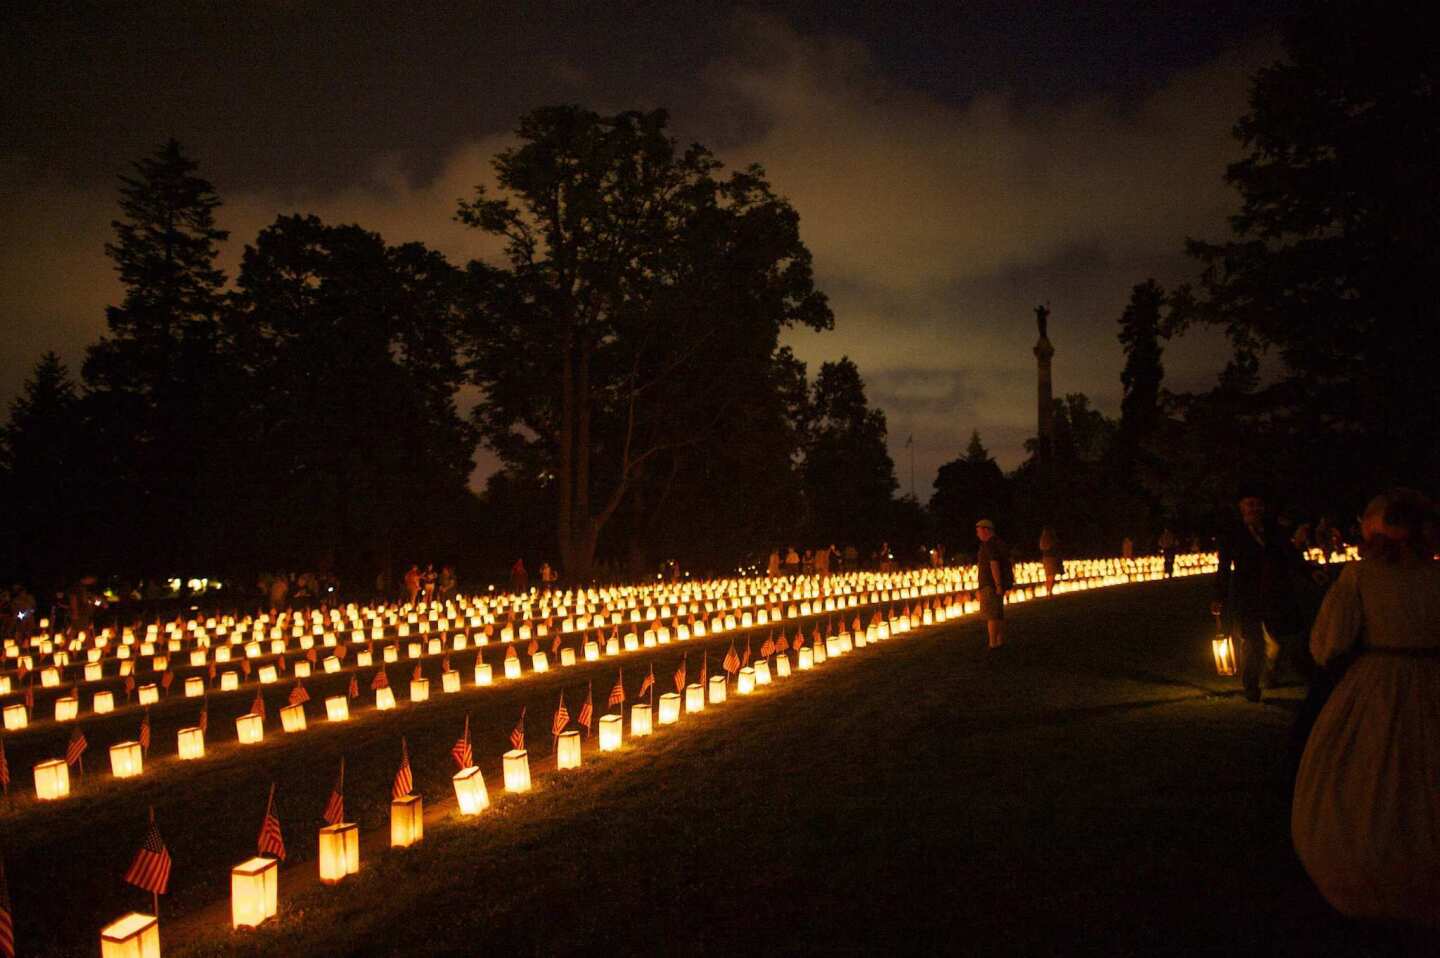 Visitors attend the Memorial Luminaria at the Soldiers' National Cemetery during events marking the 150th anniversary of the Battle of Gettysburg, in Gettysburg, Pennsylvania